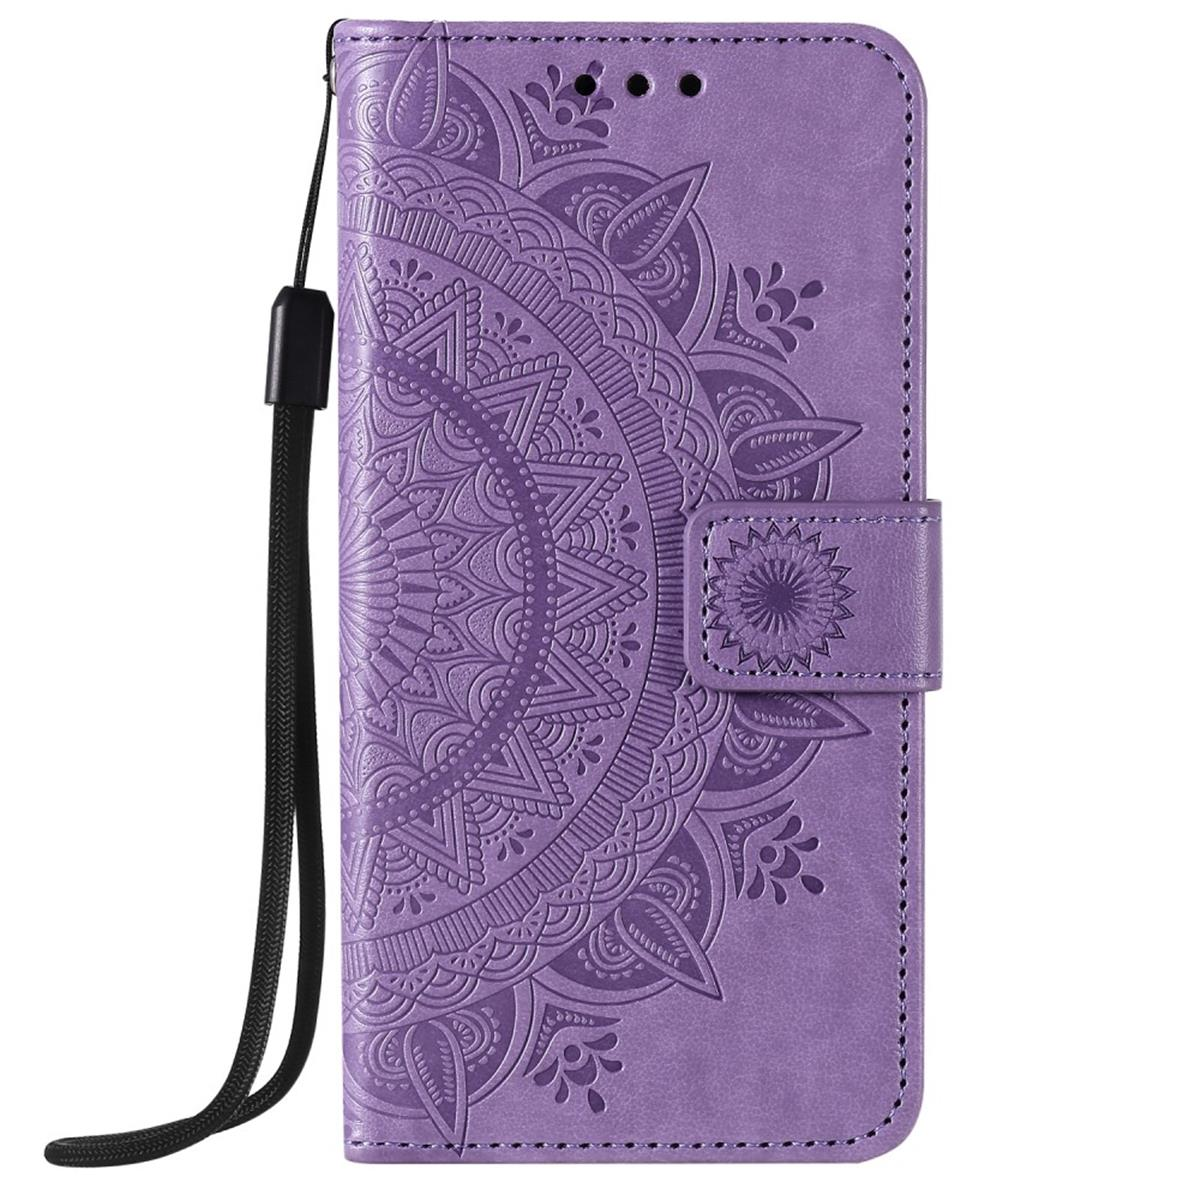 COVERKINGZ Klapphülle mit Max, 12 Pro Muster, Bookcover, iPhone Apple, Lila Mandala